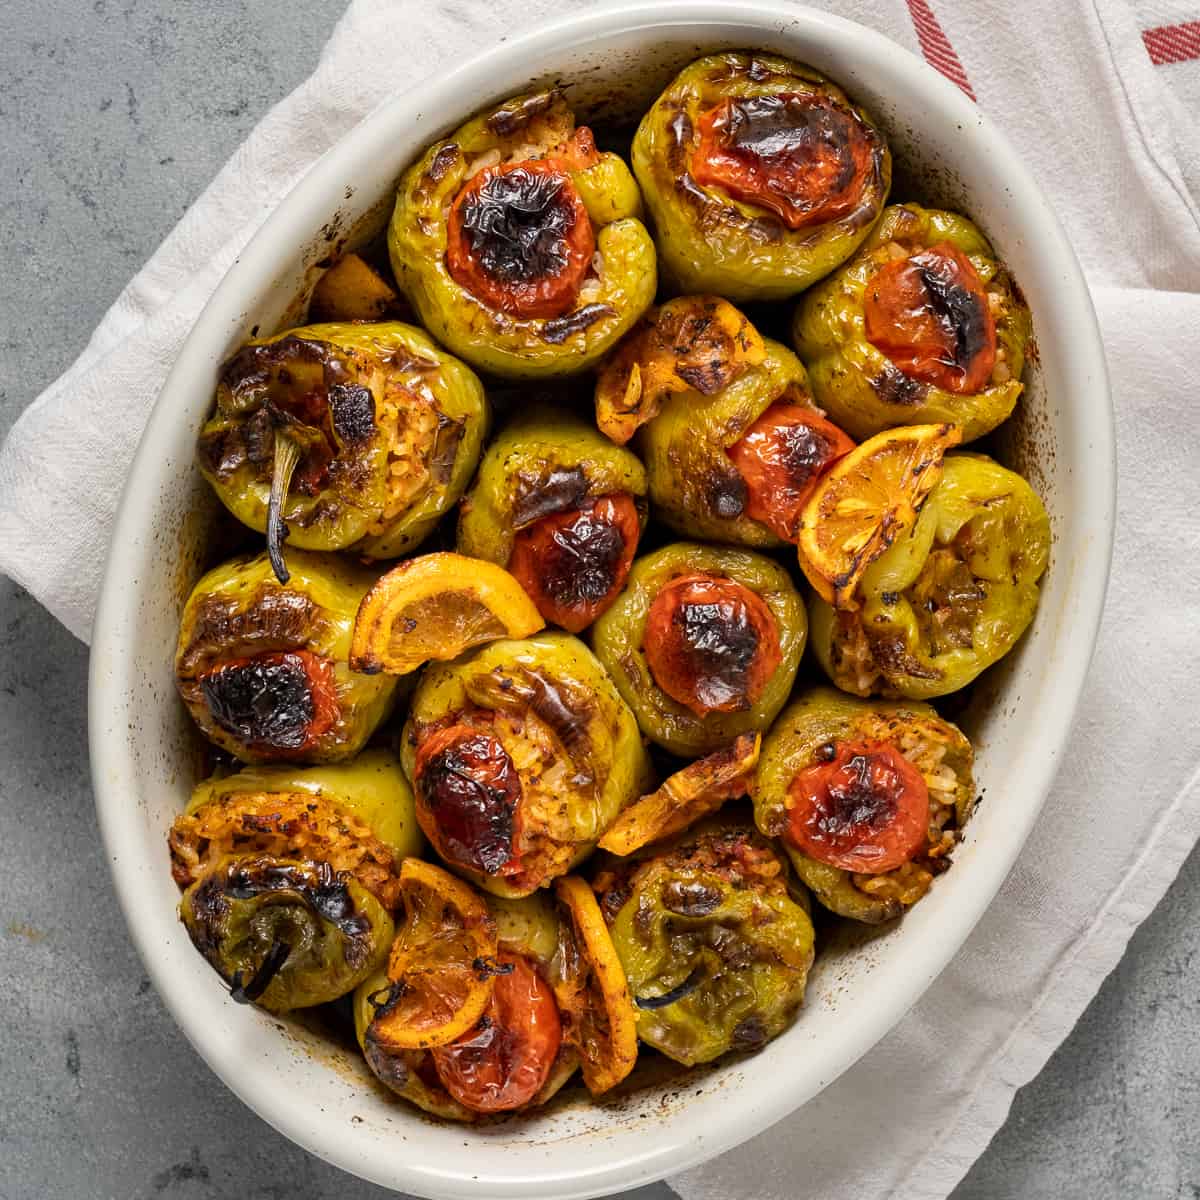 https://www.giverecipe.com/wp-content/uploads/2019/05/baked-stuffed-peppers-with-rice.jpg